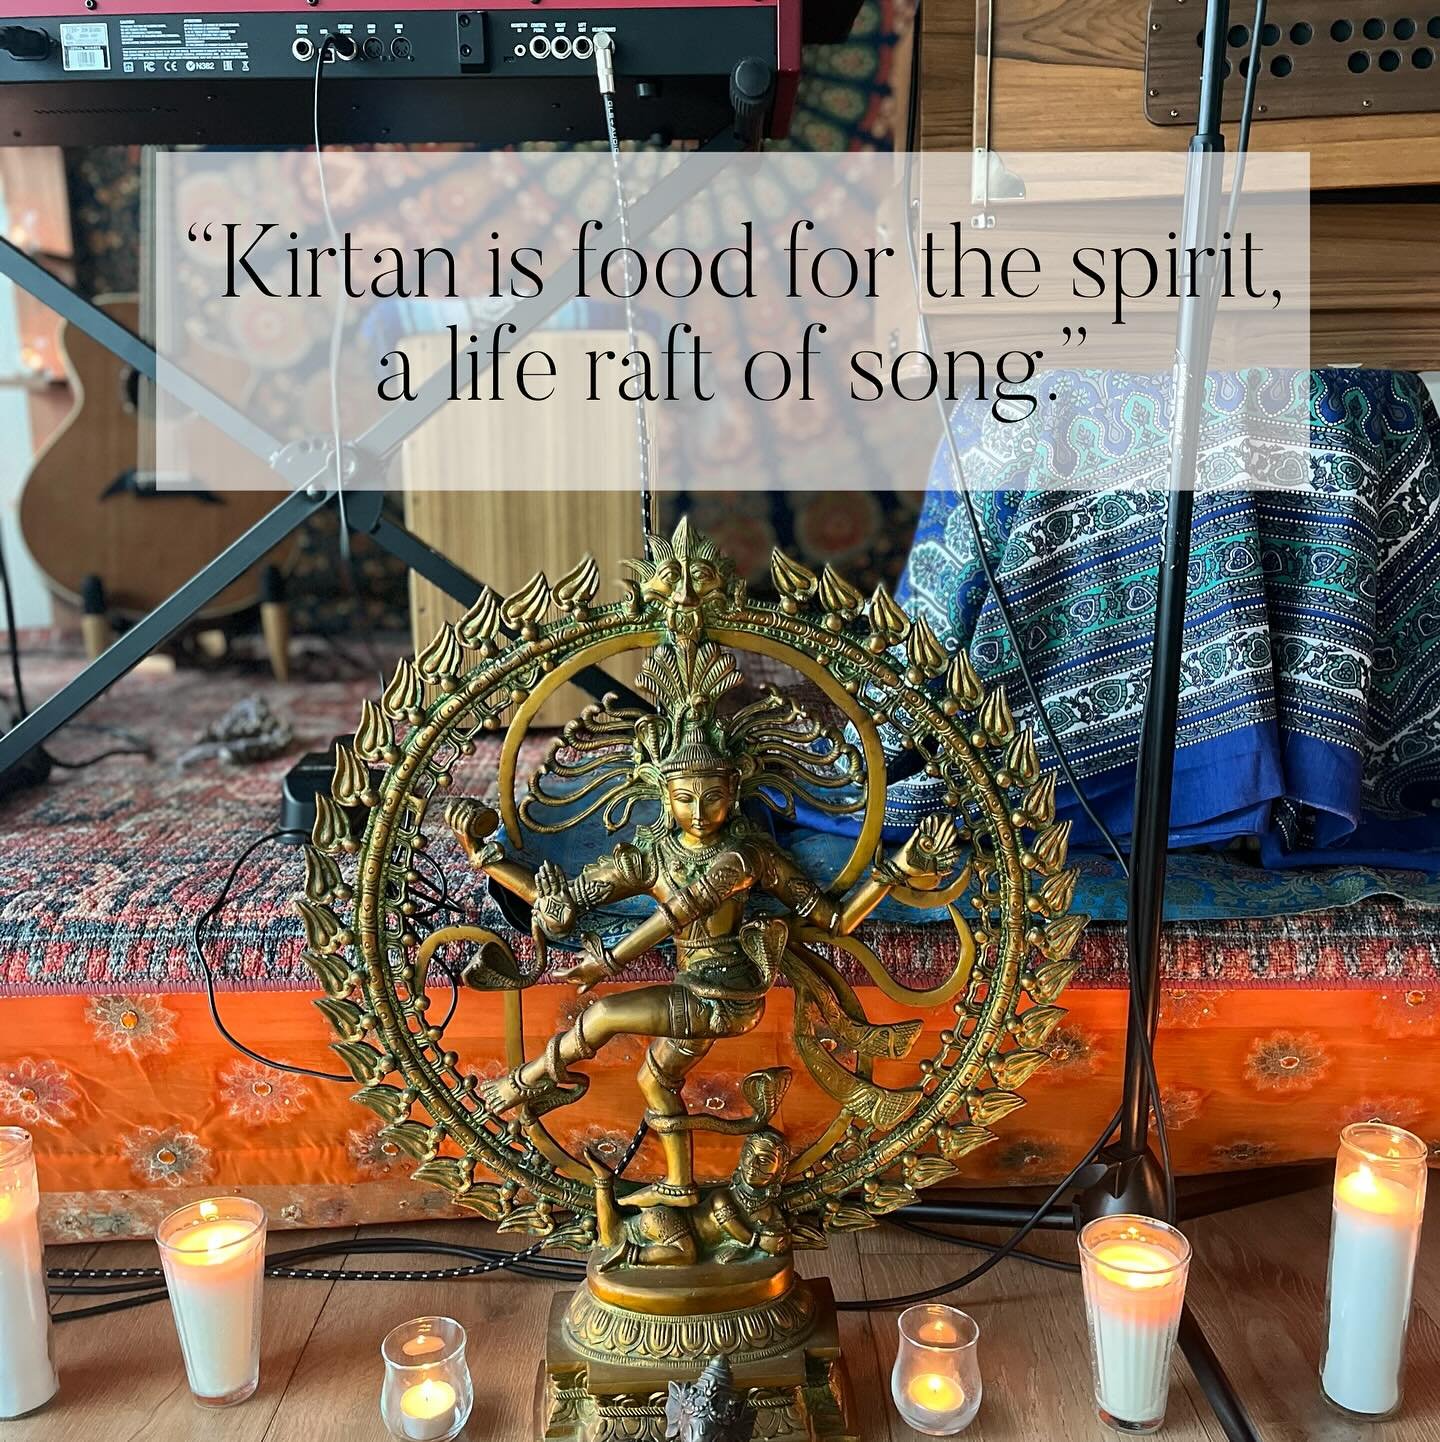 If you haven&rsquo;t experienced the magic of Kirtan, we invite you to join us tomorrow night! Ana McCabe and Paloma Estevez will be guiding us through call and response chanting; a beautiful way to connect to the divine with you. We still have some 